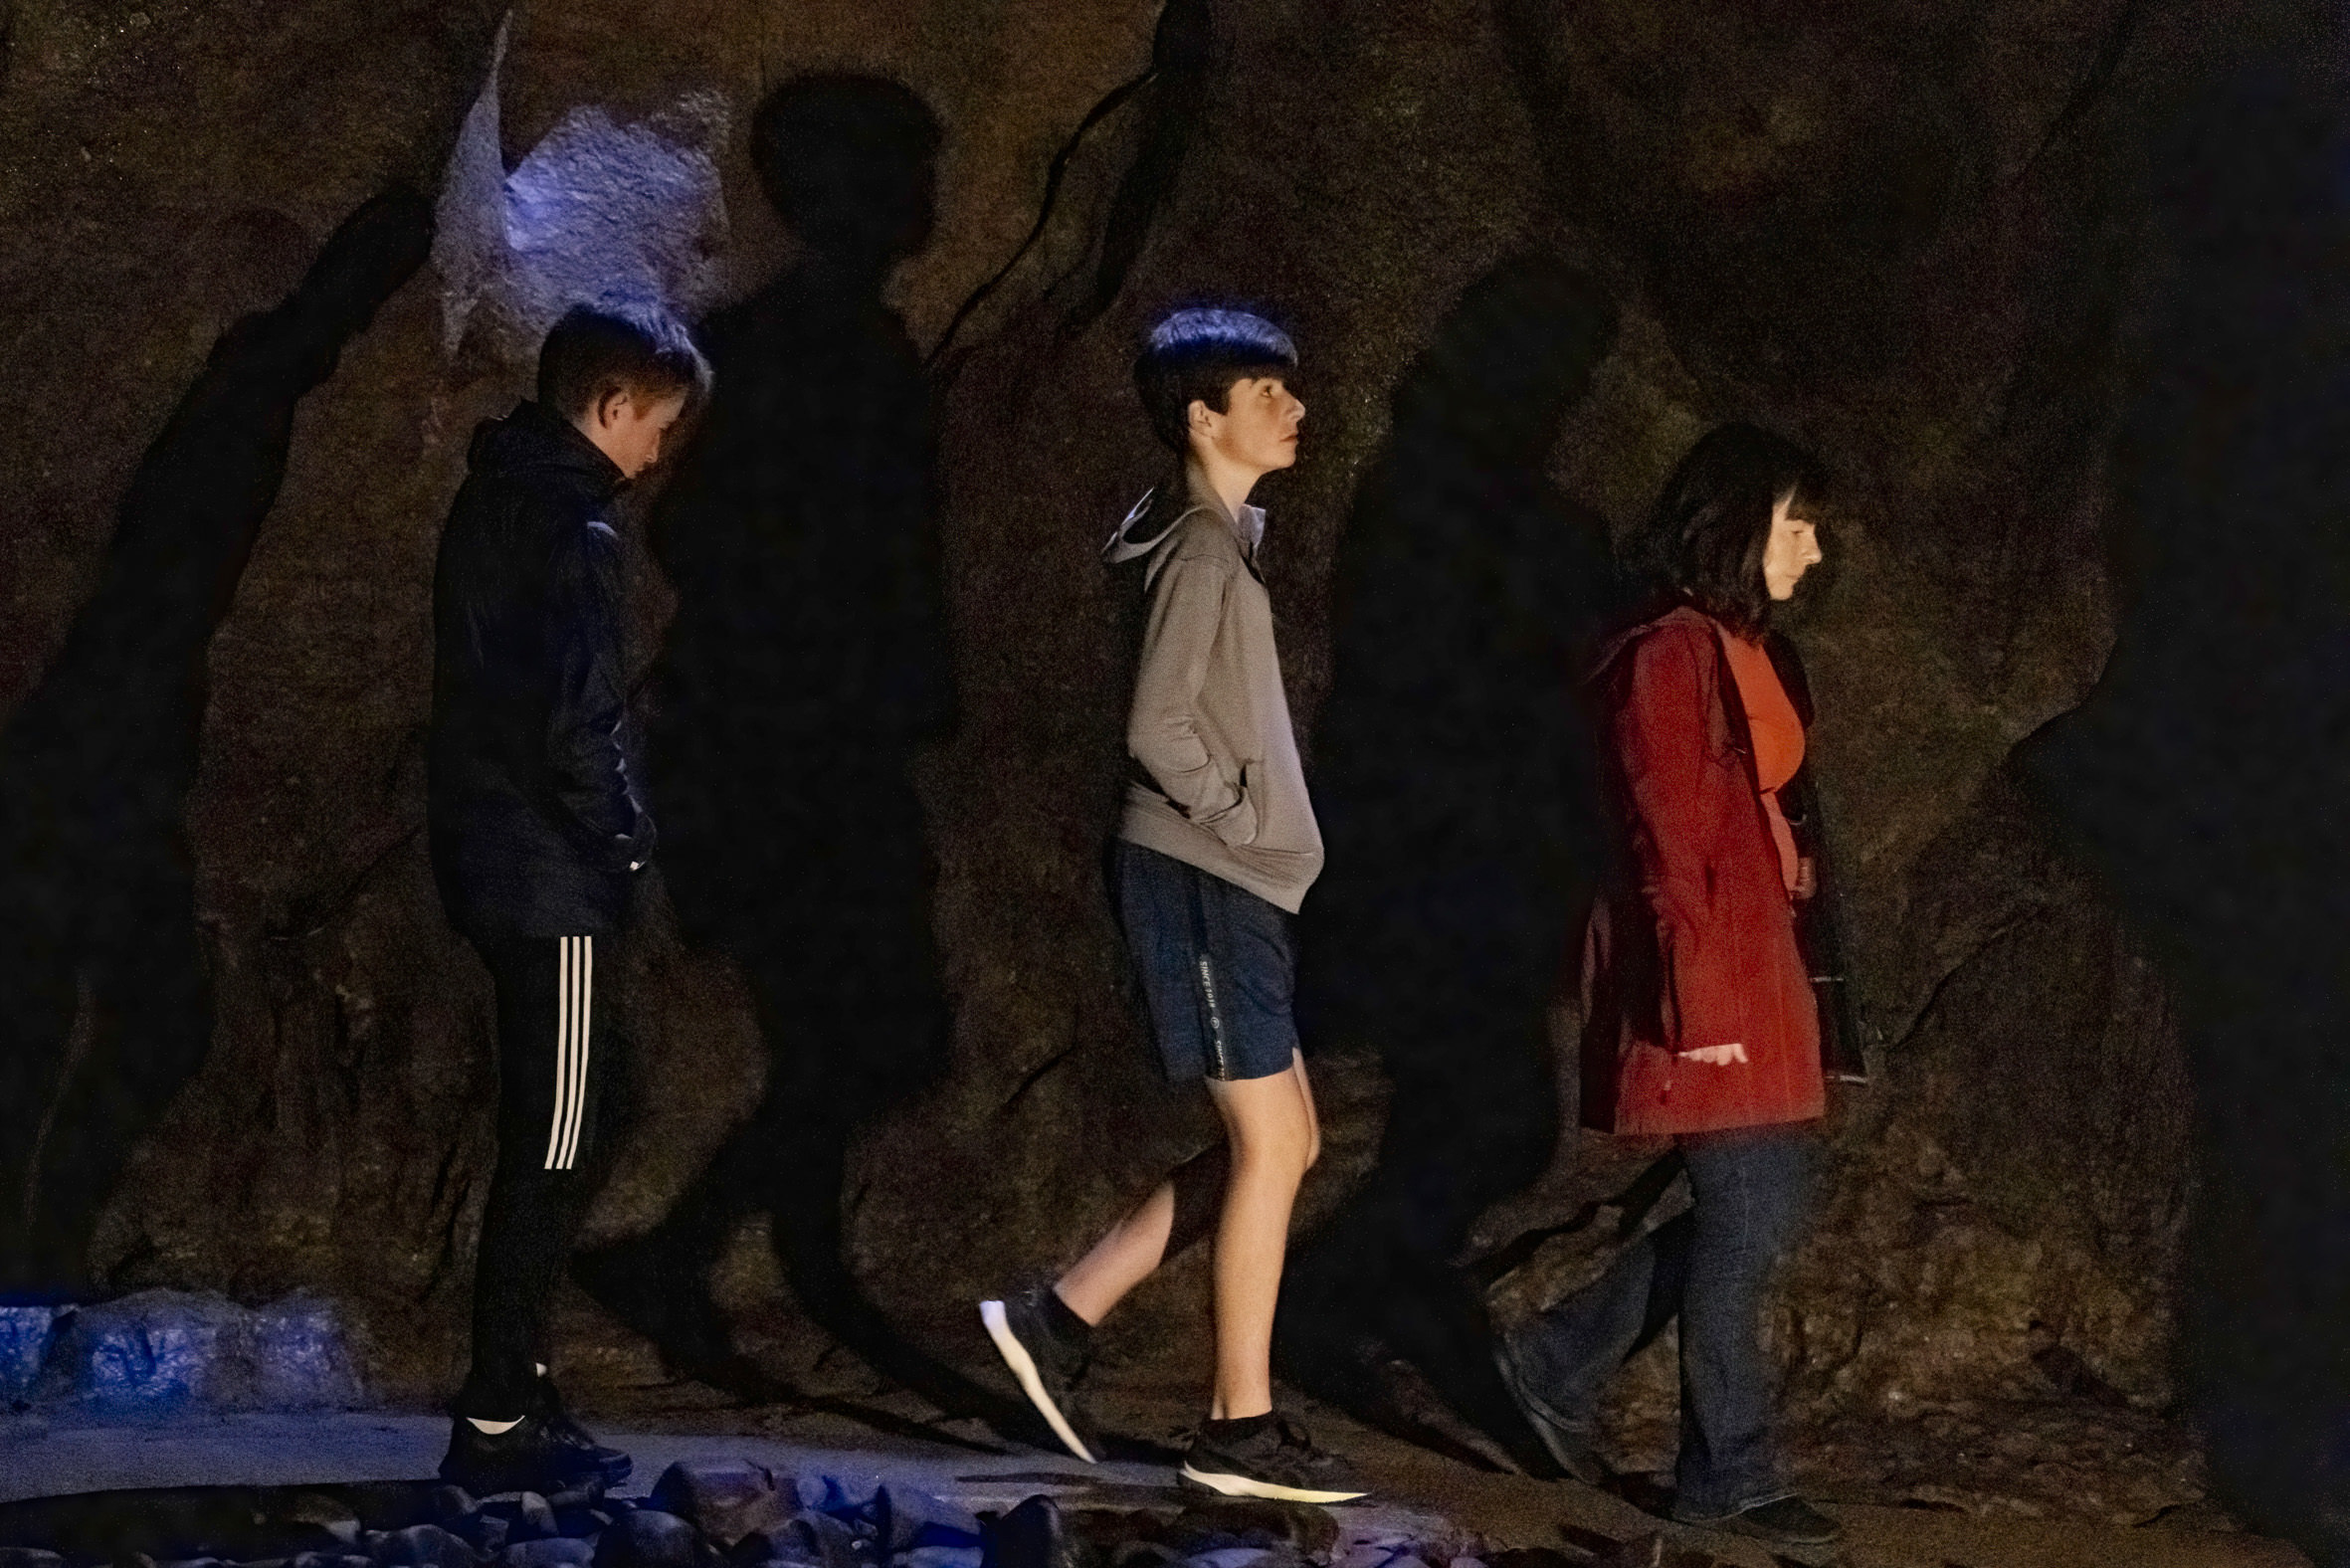 Making their way through the caves.